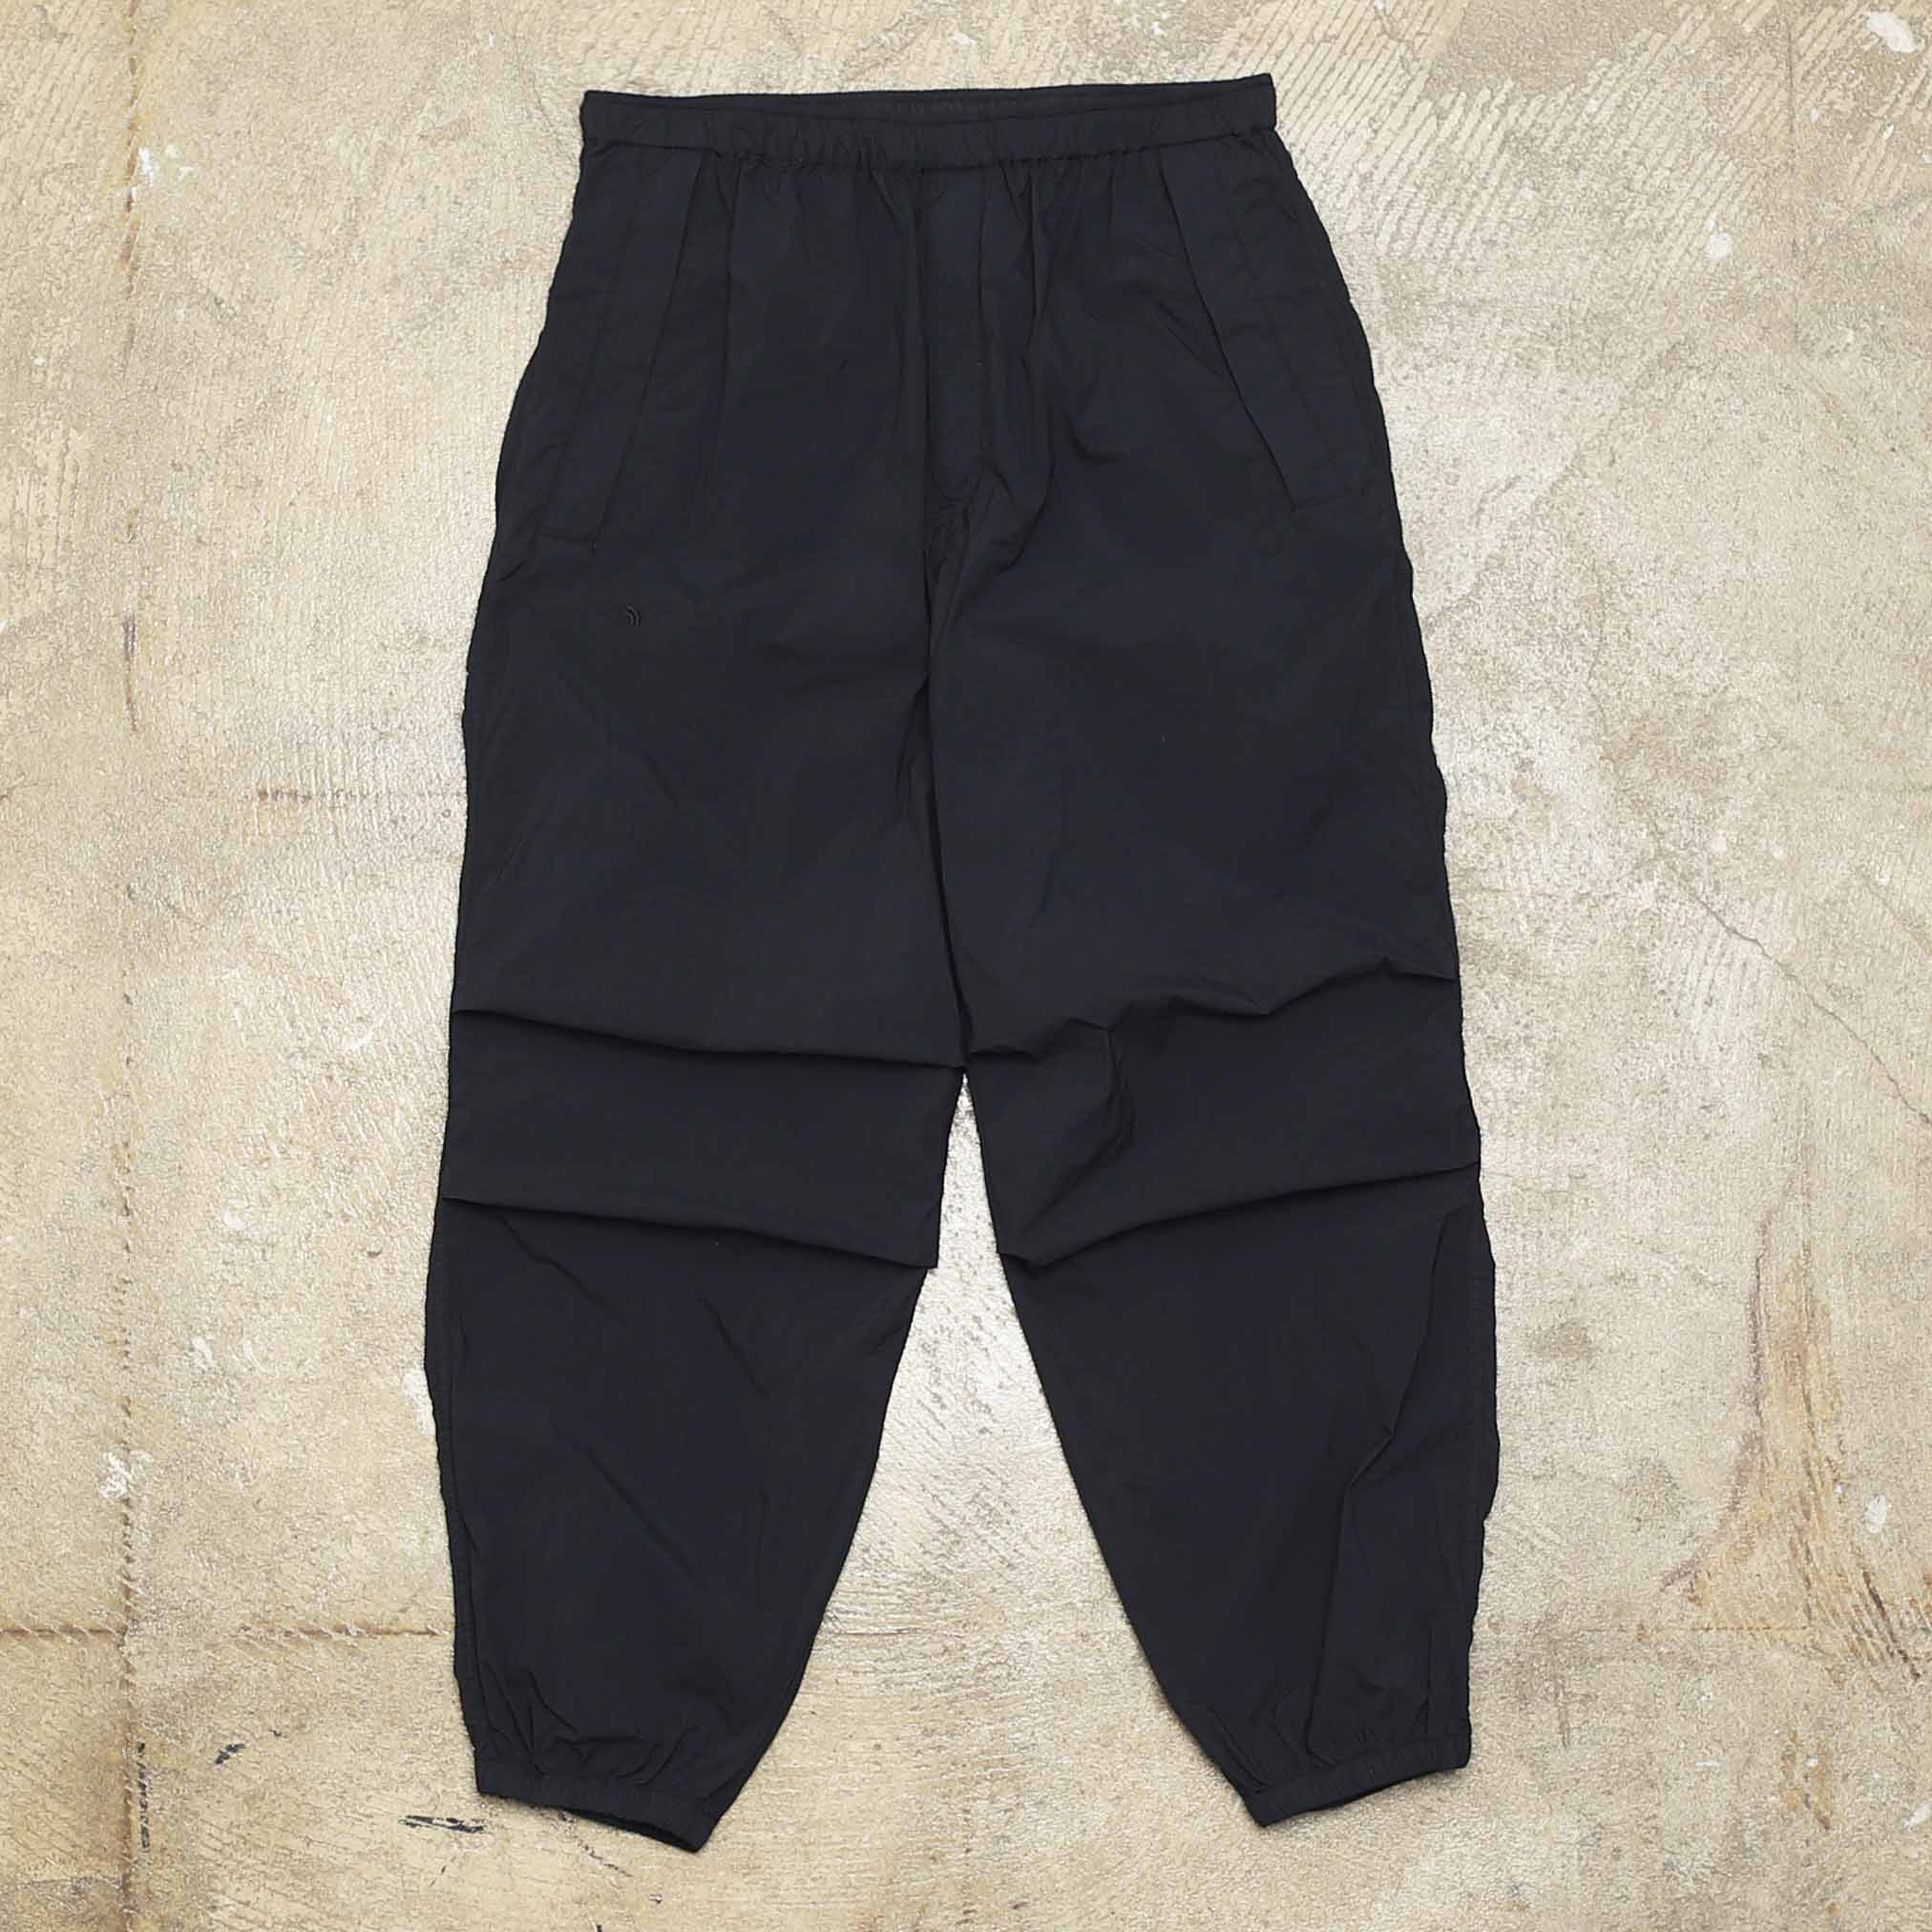 THE NORTH FACE PURPLE LABEL DYED JOGGER PANTS - NAVY